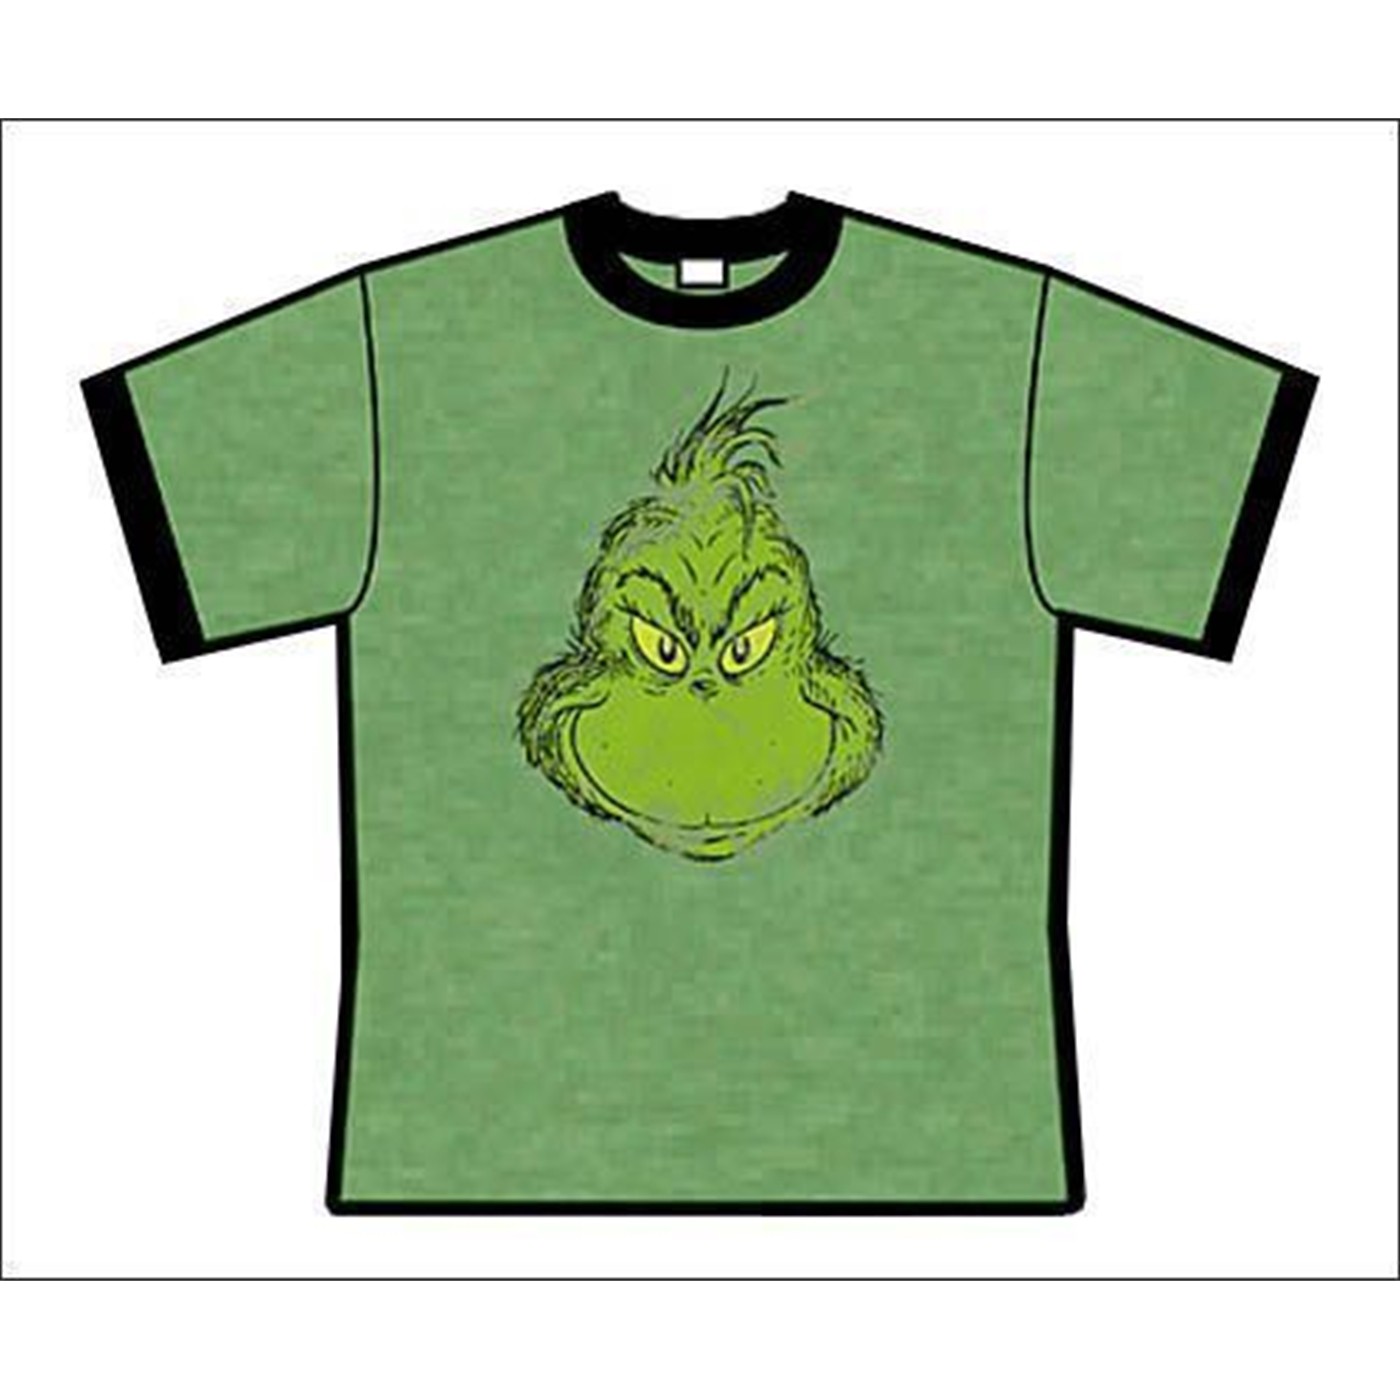 The Grinch Ringer T-shirt